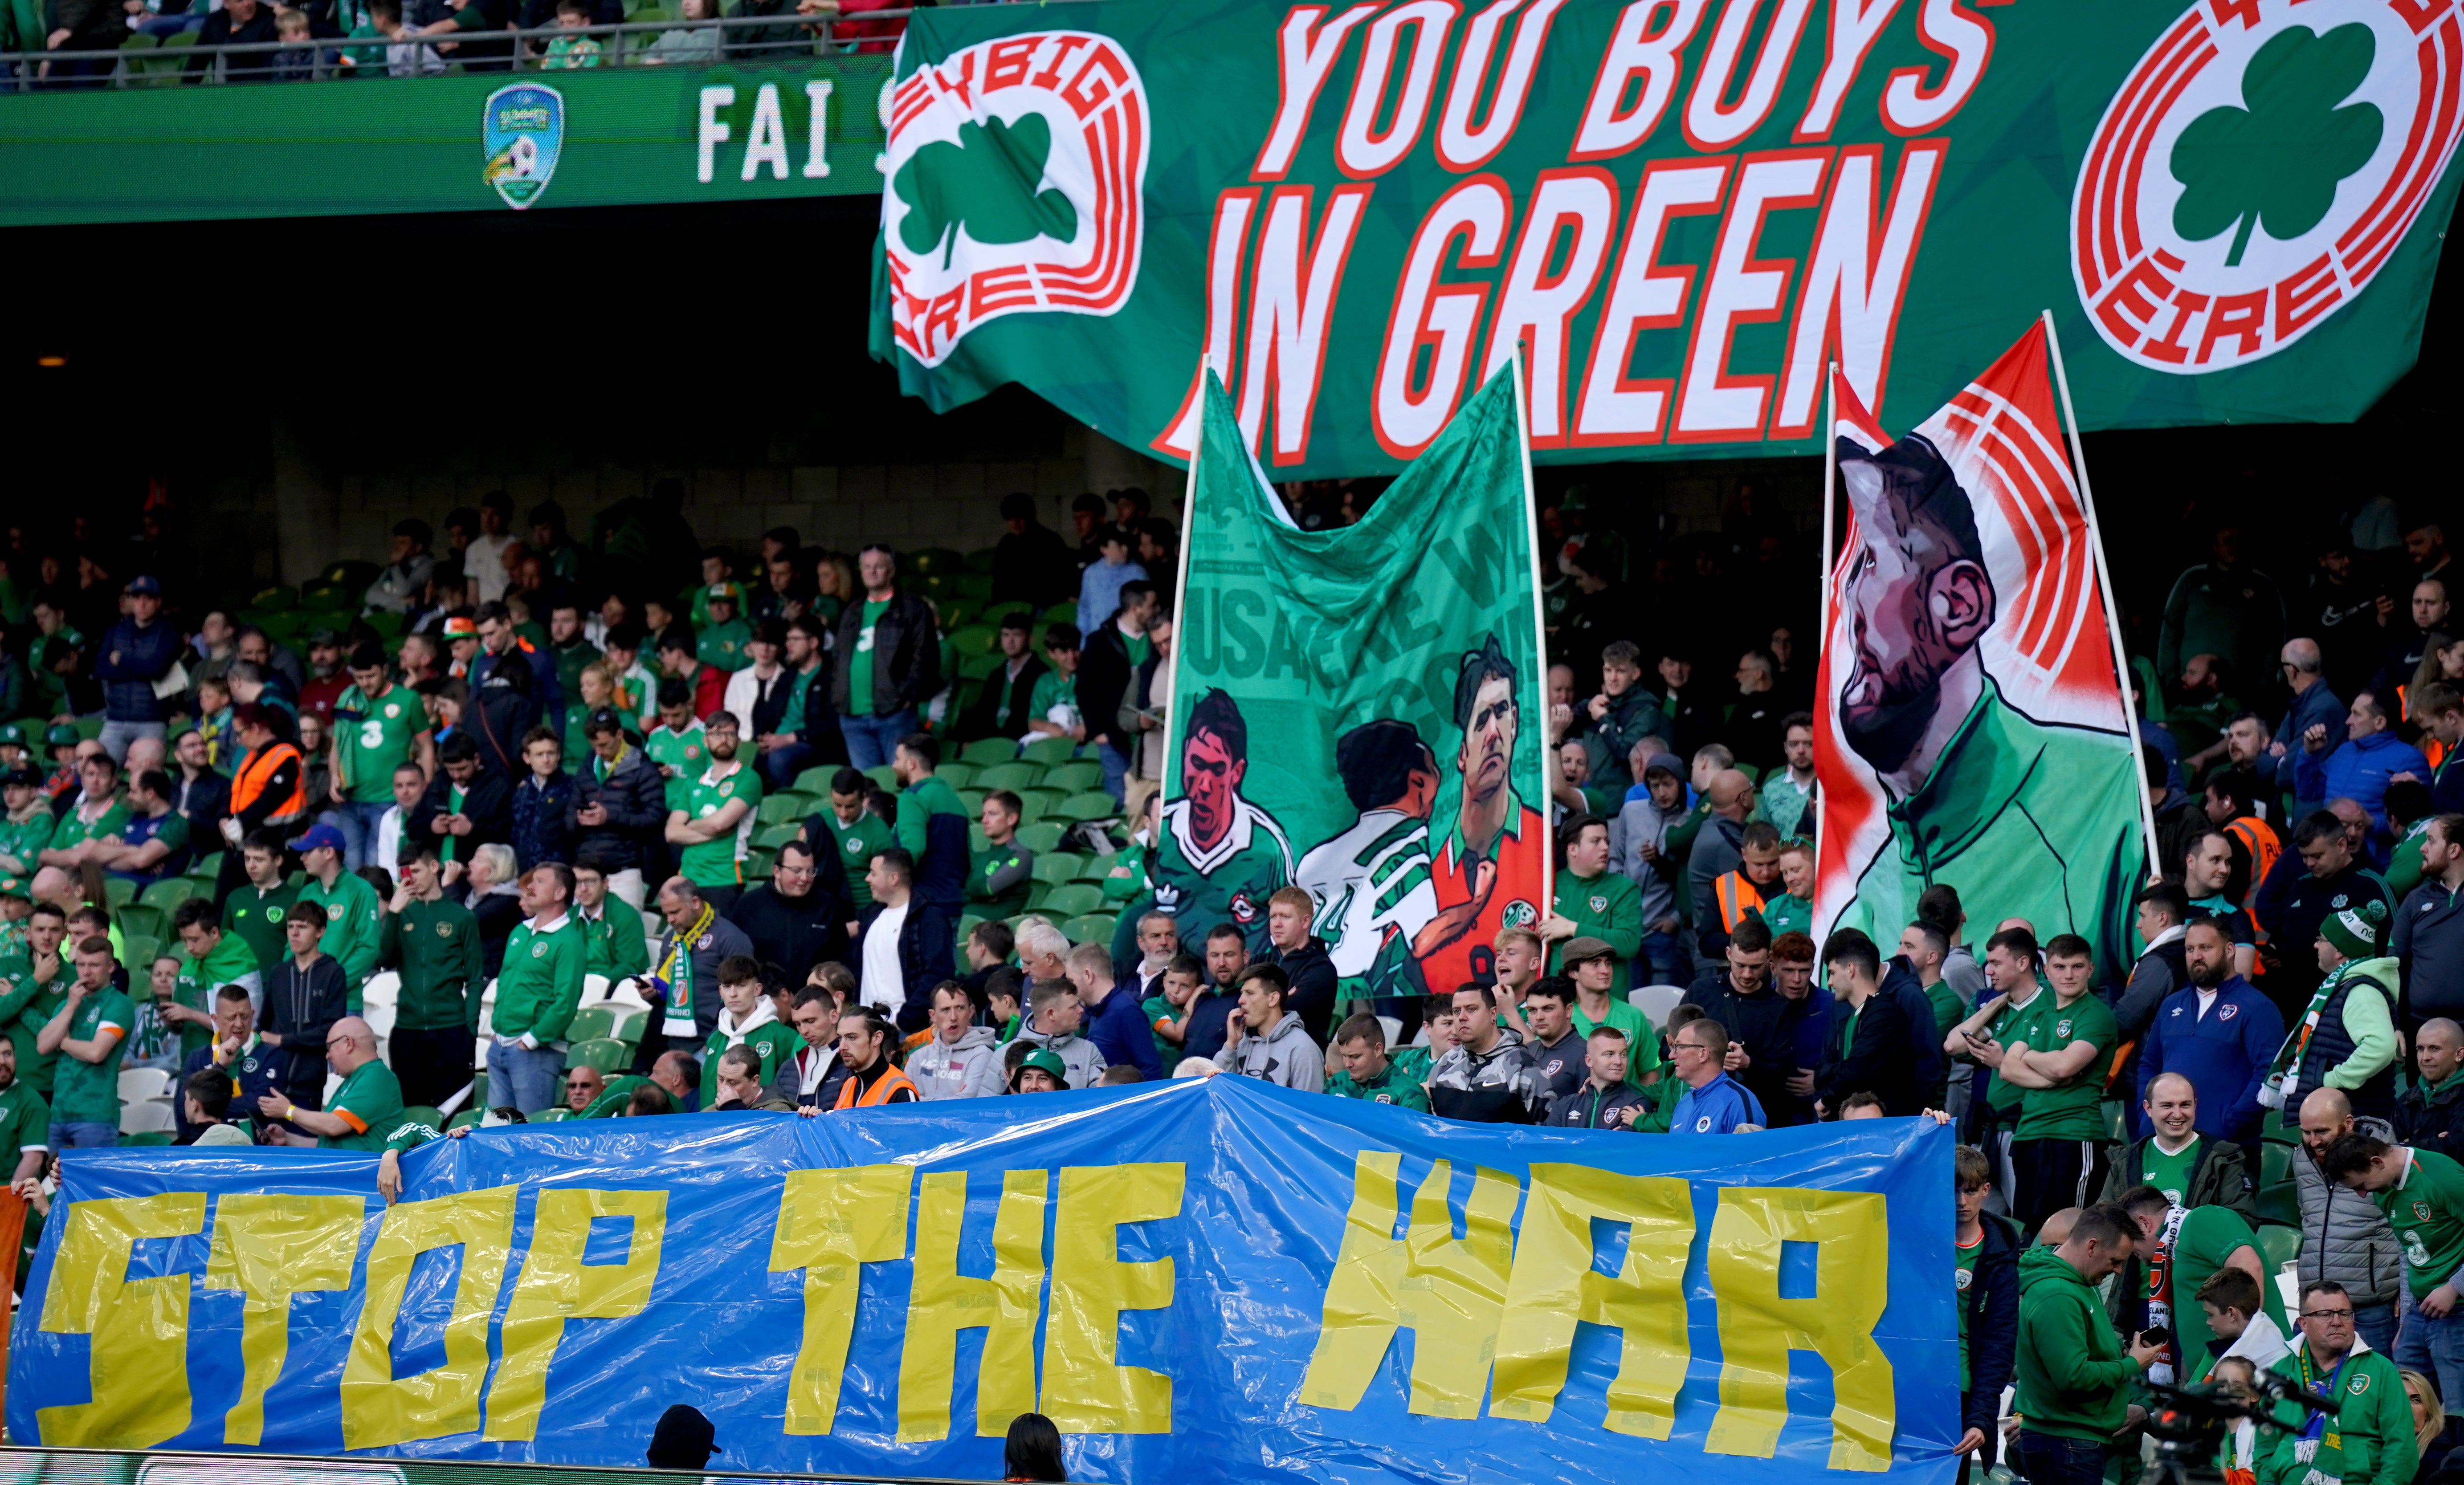 Republic of Ireland fans held up a banner in support of Ukraine (Niall Carson/PA)